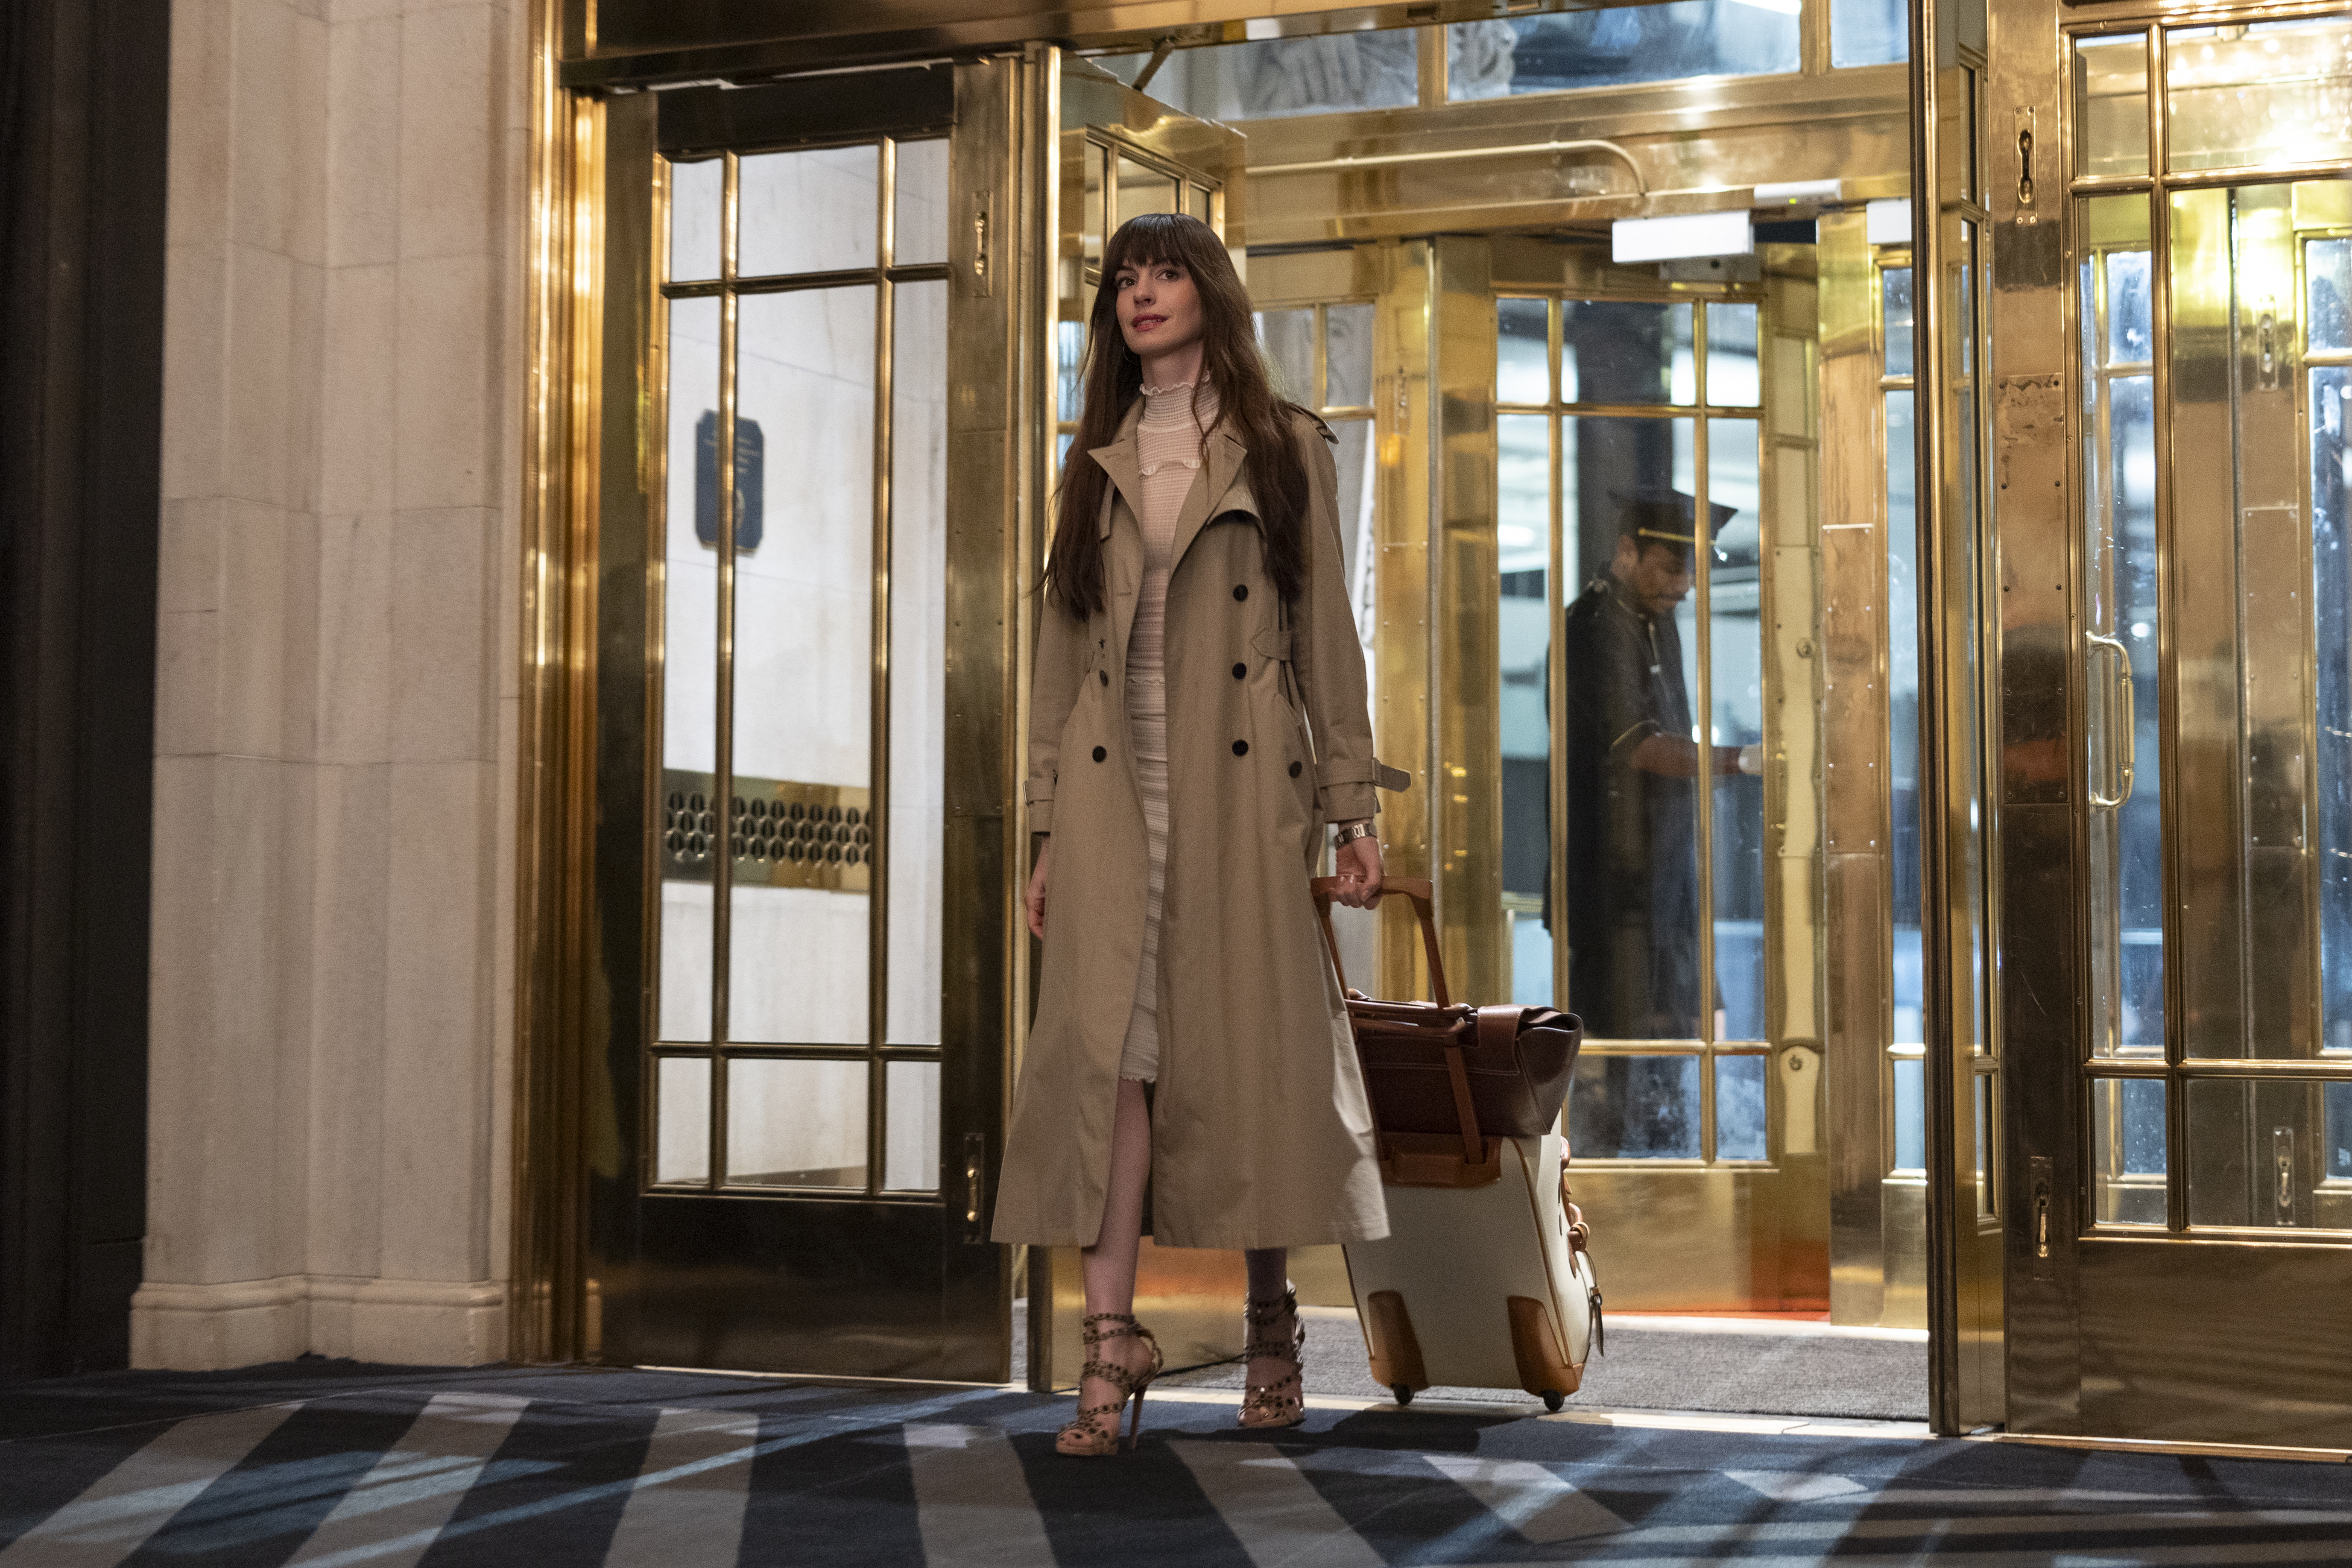 Woman in a trench coat carrying luggage exits a building, in what appears to be a scene from a film or TV show